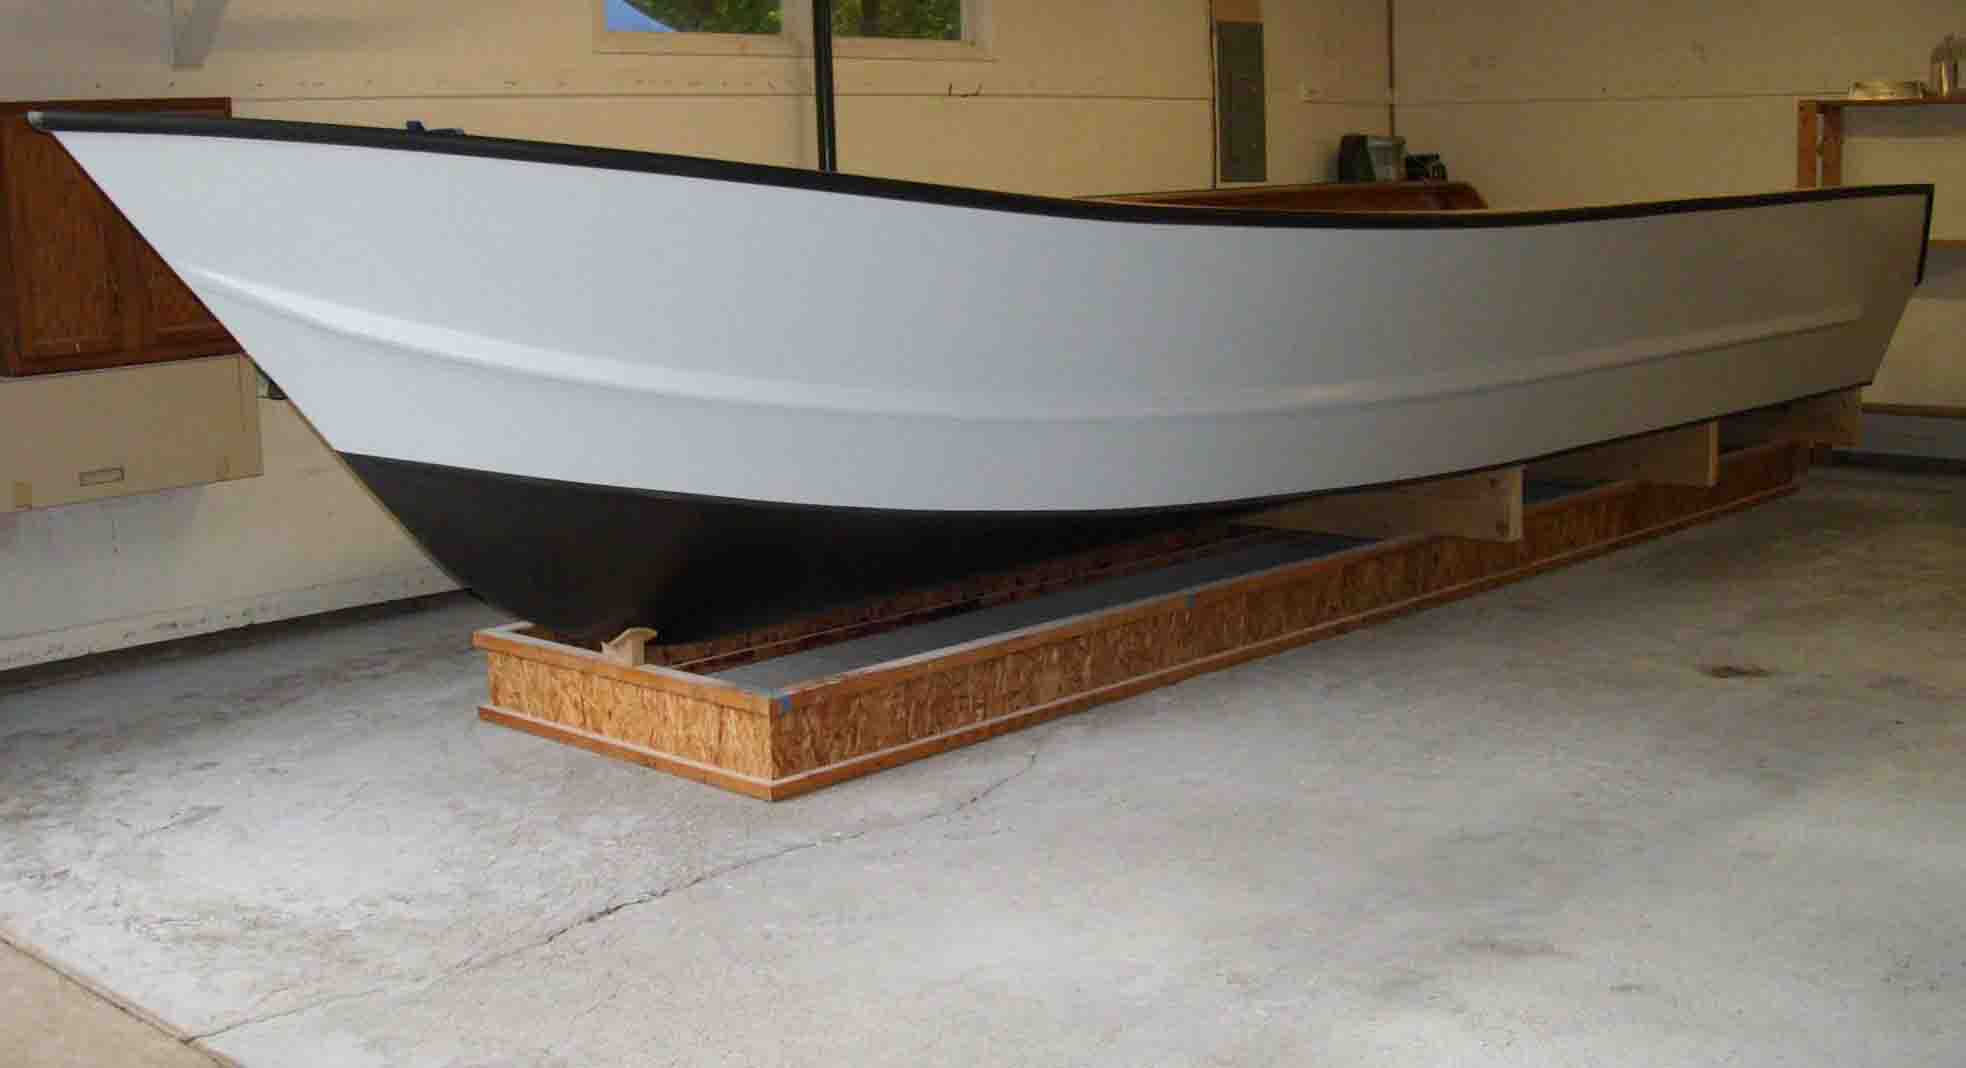 Plywood Motor Boat Plans - Wallpaperall